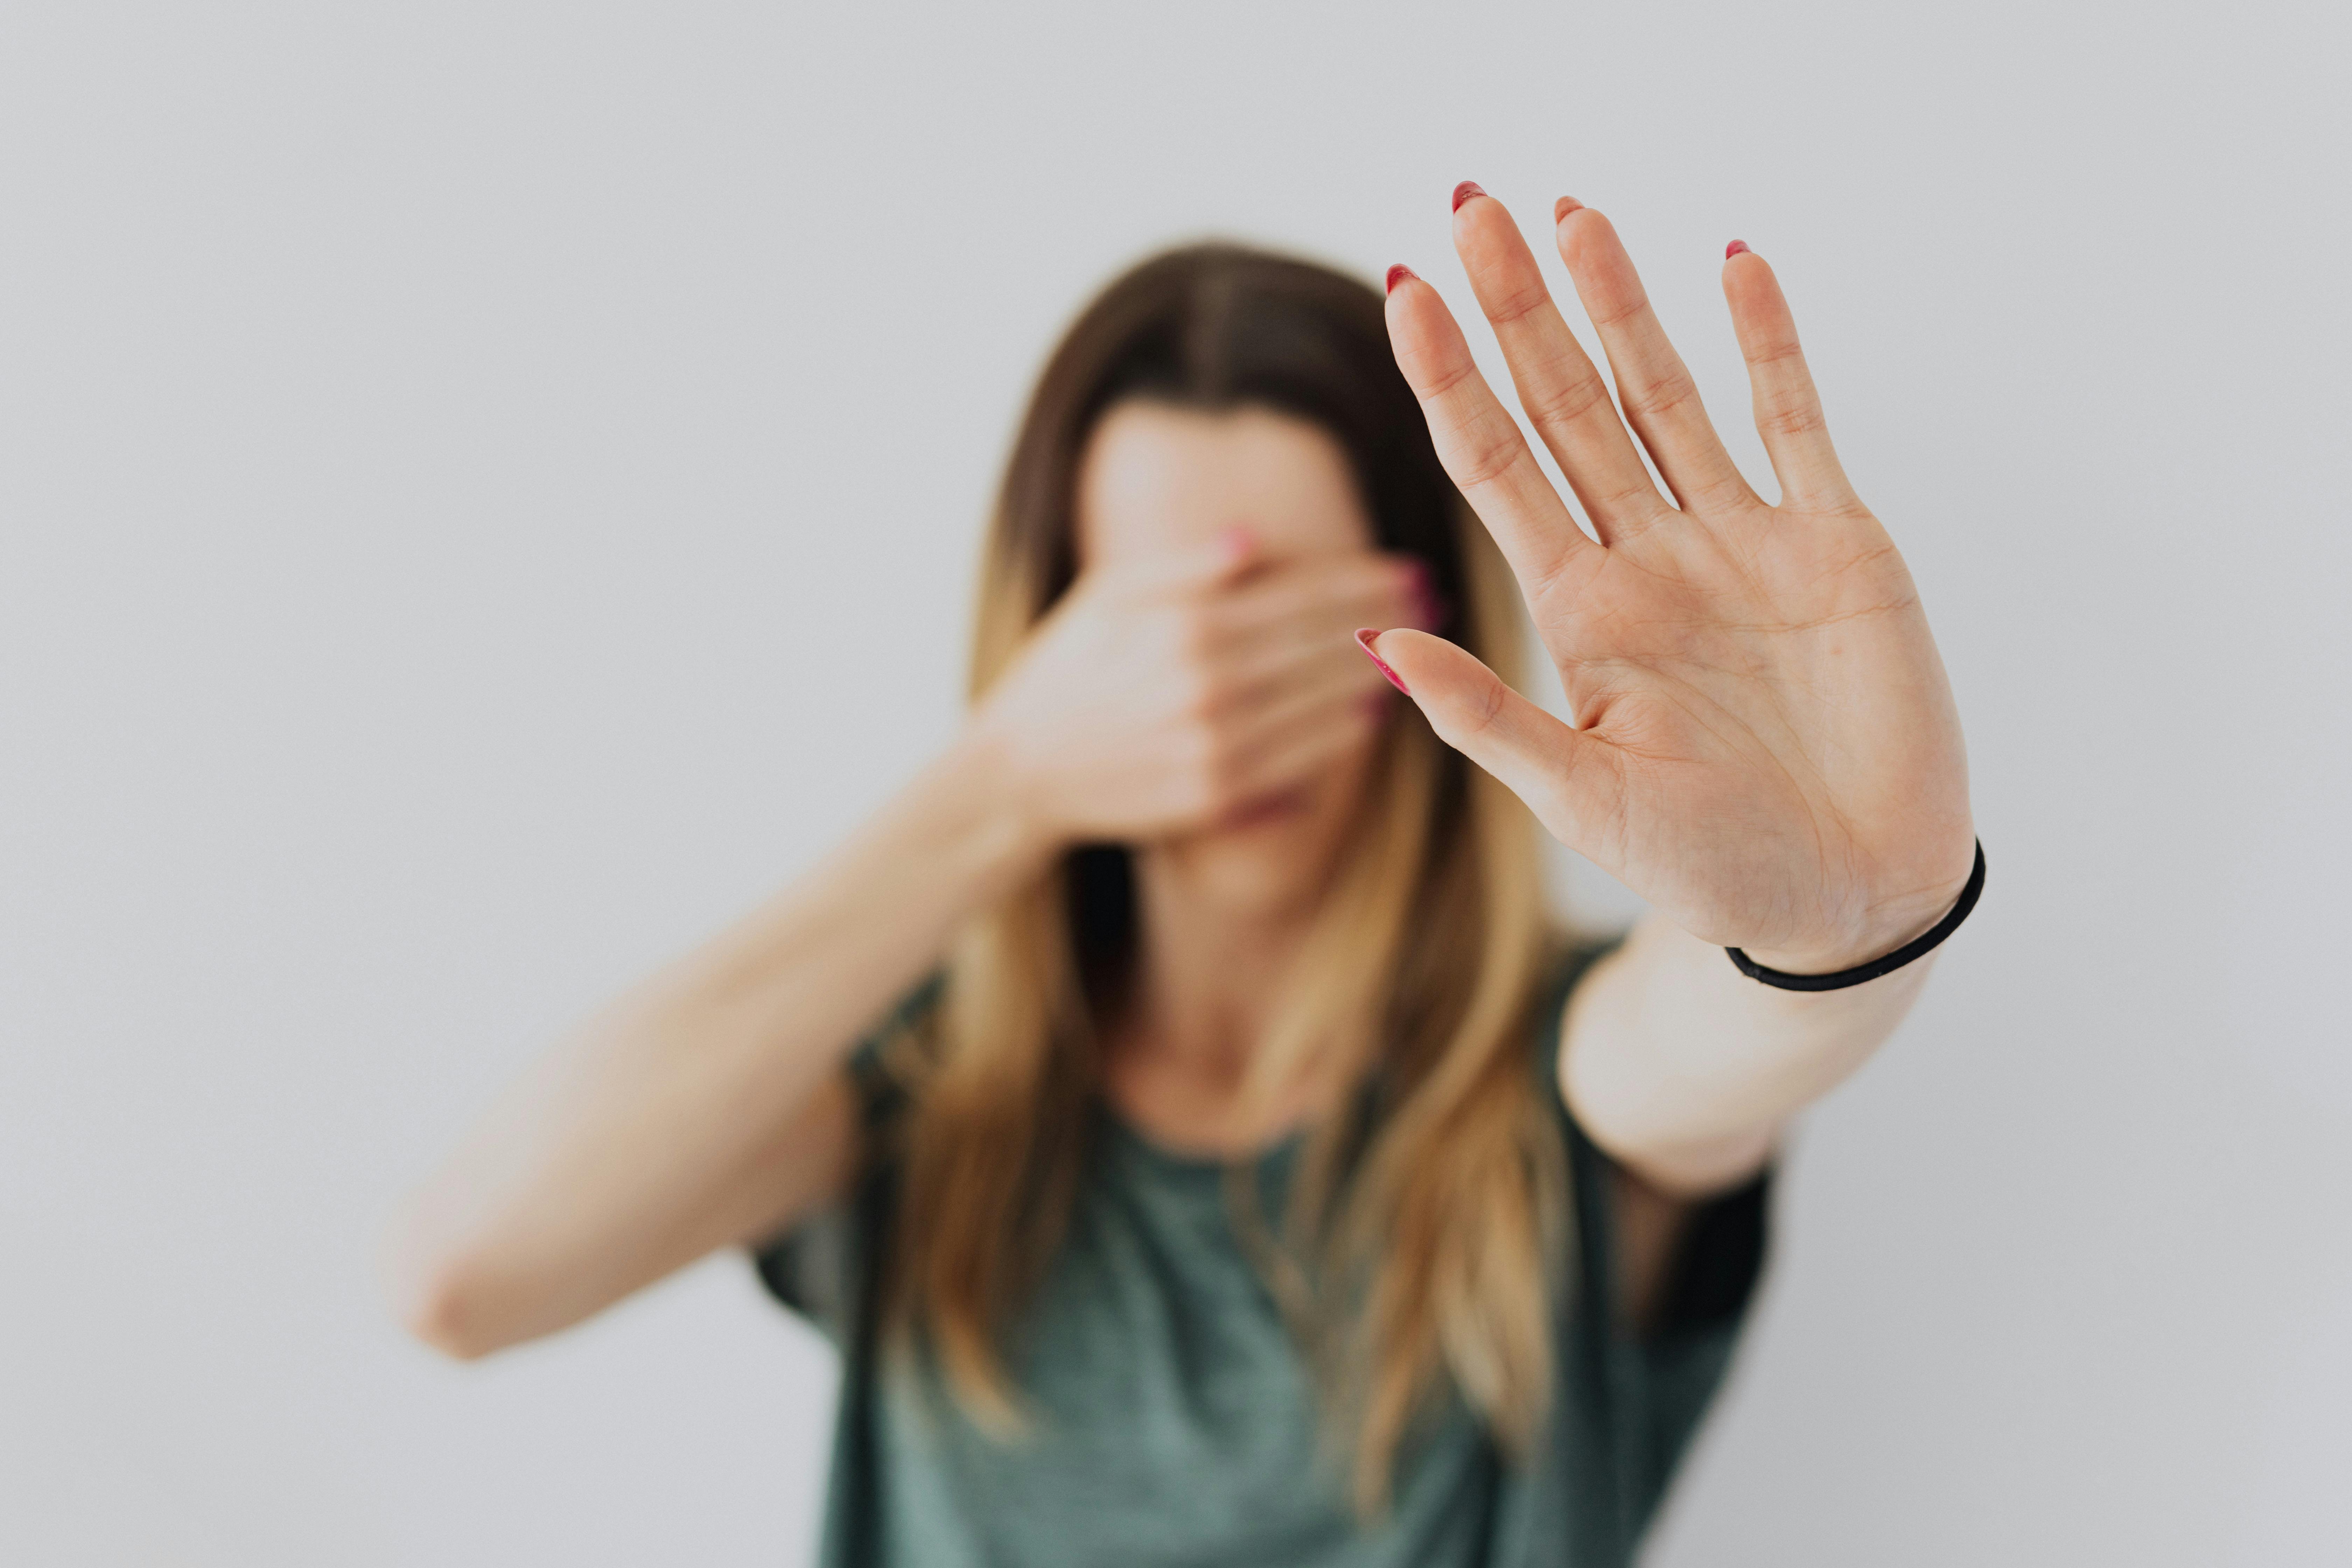 Panicking woman hides her face | Source: Pexels